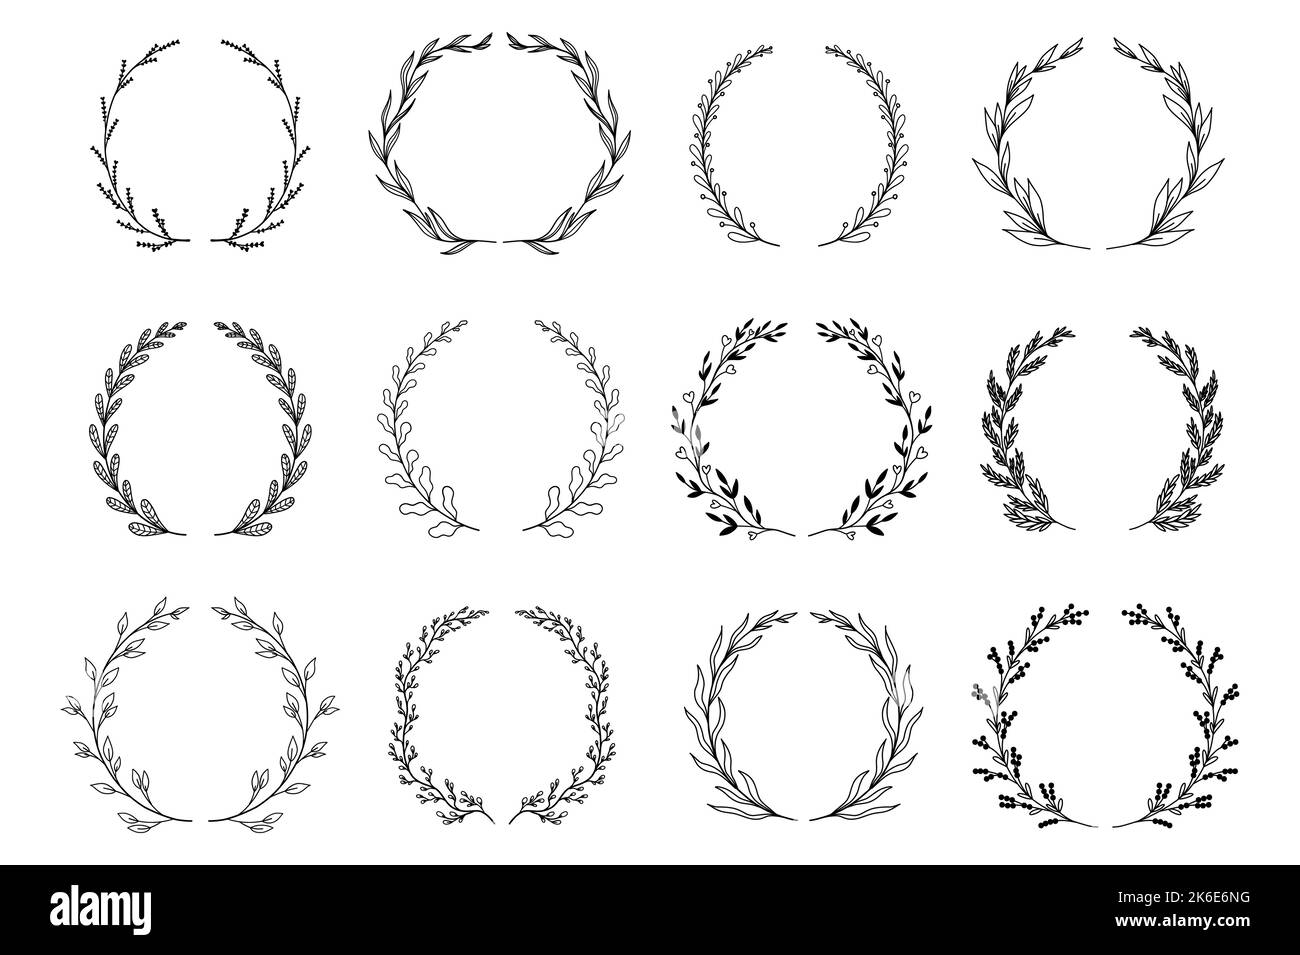 Ornamental branch wreathes set in hand drawn design. Laurel leaves wreath and decorative branch bundle. Collection of differen herbs, twigs, flowers Stock Vector